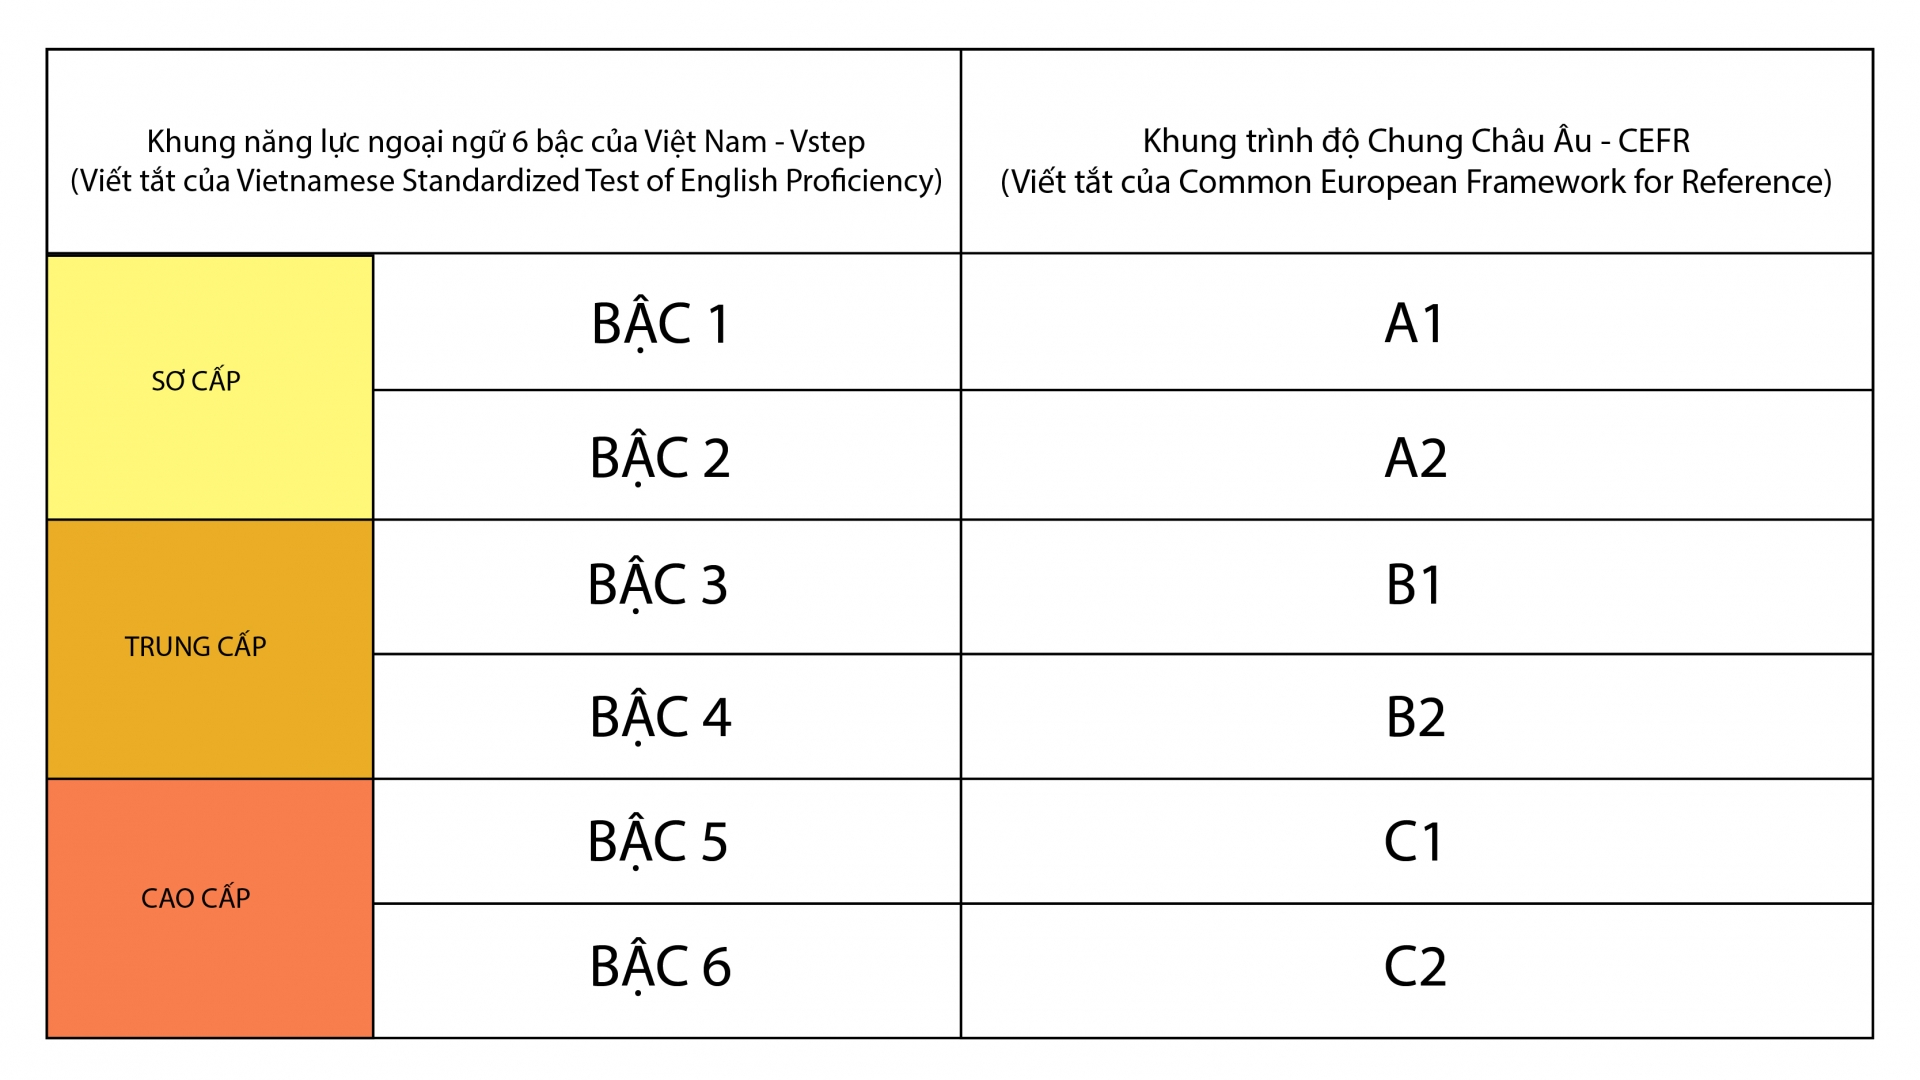 chứng chỉ tiếng Anh vstep (Vietnamese Standardized Test of English Proficiency)